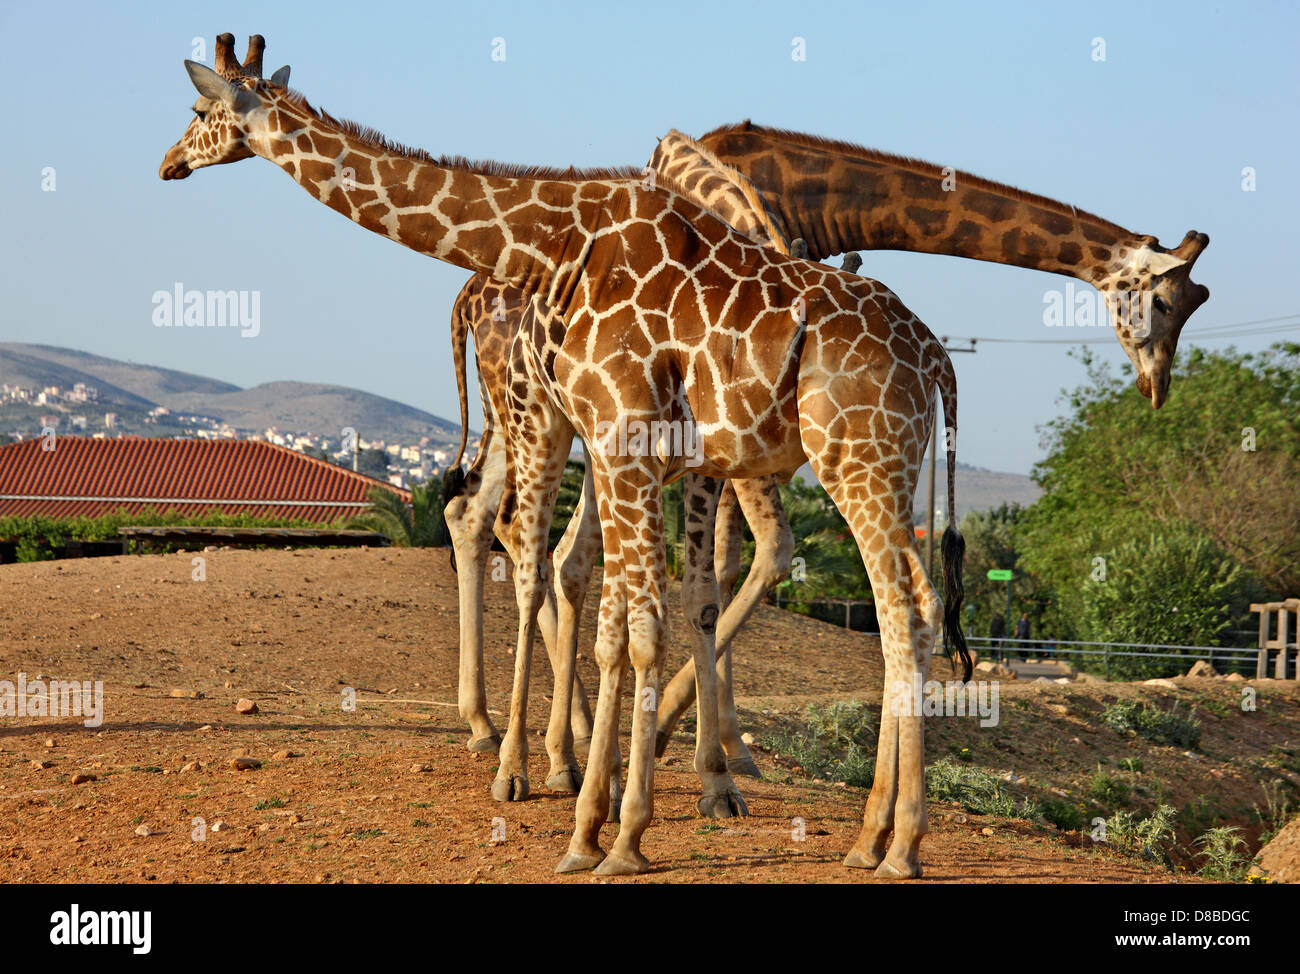 Giraffes at the Attica Zoological Park, at Spata, very close to Athens, Attica, Greece Stock Photo